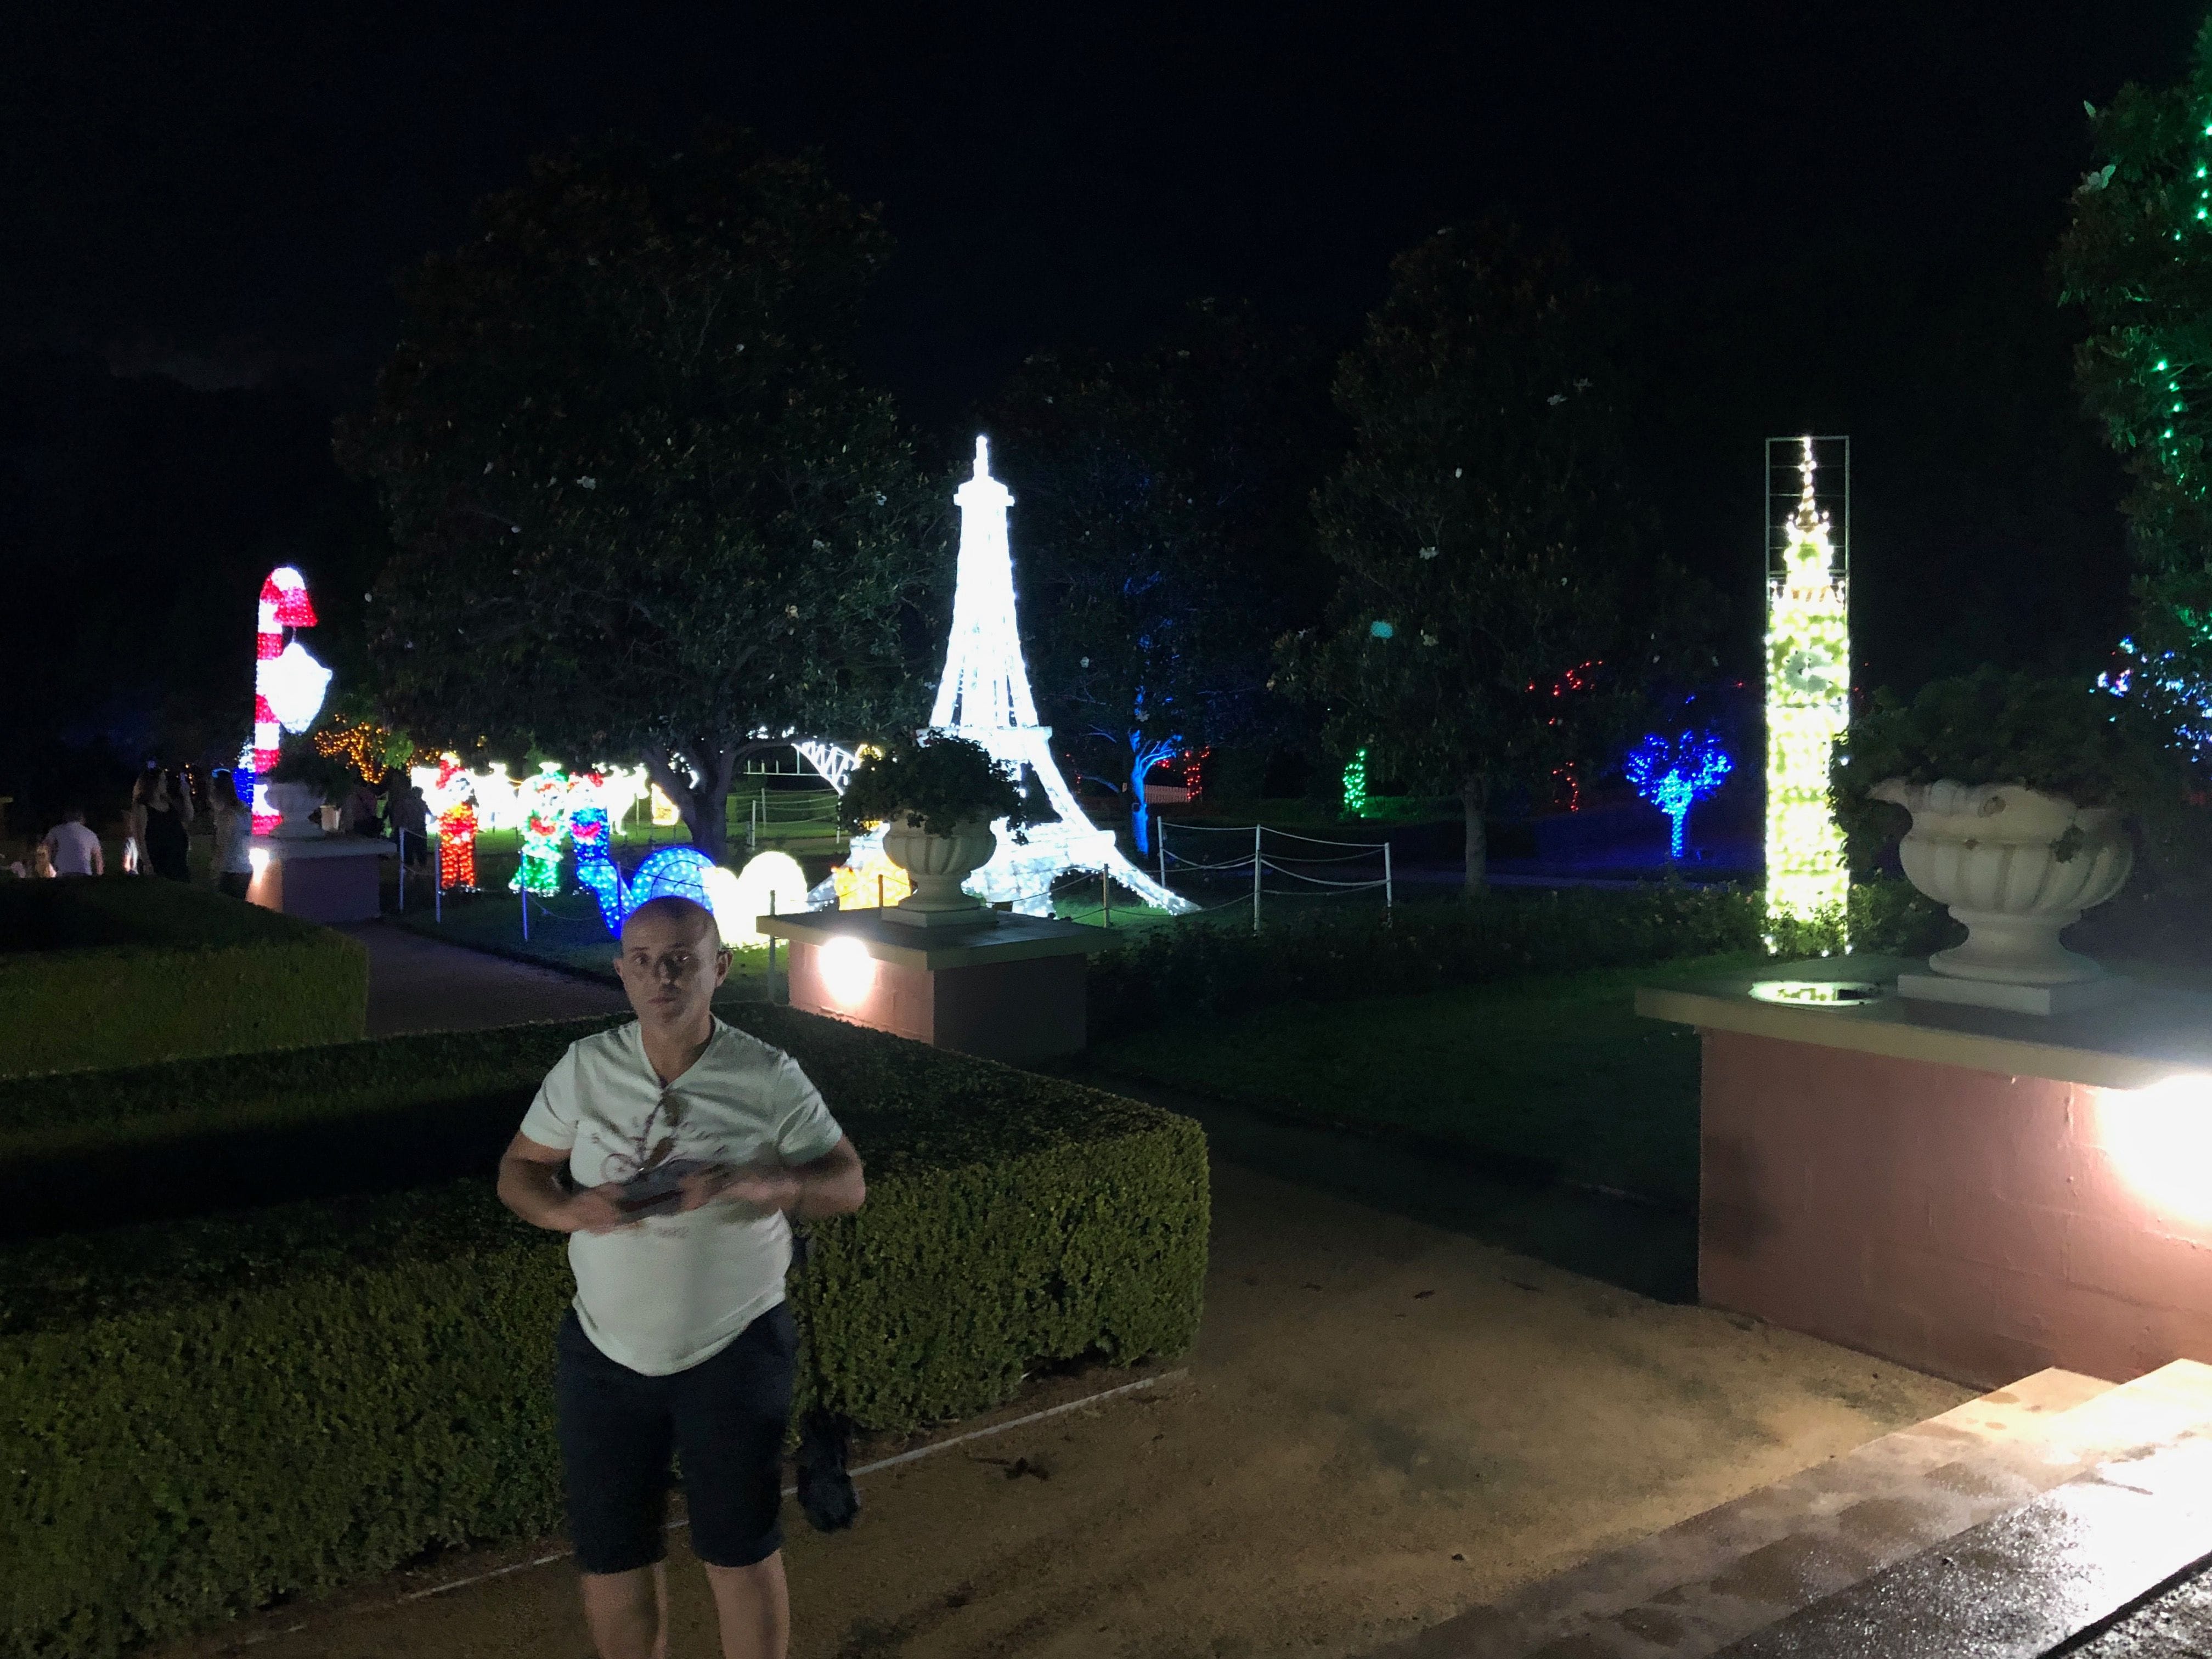 Hunter Valley Gardens Christmas Lights 2018-2019 Public Day Night Tour Image -5c149f4d3a464